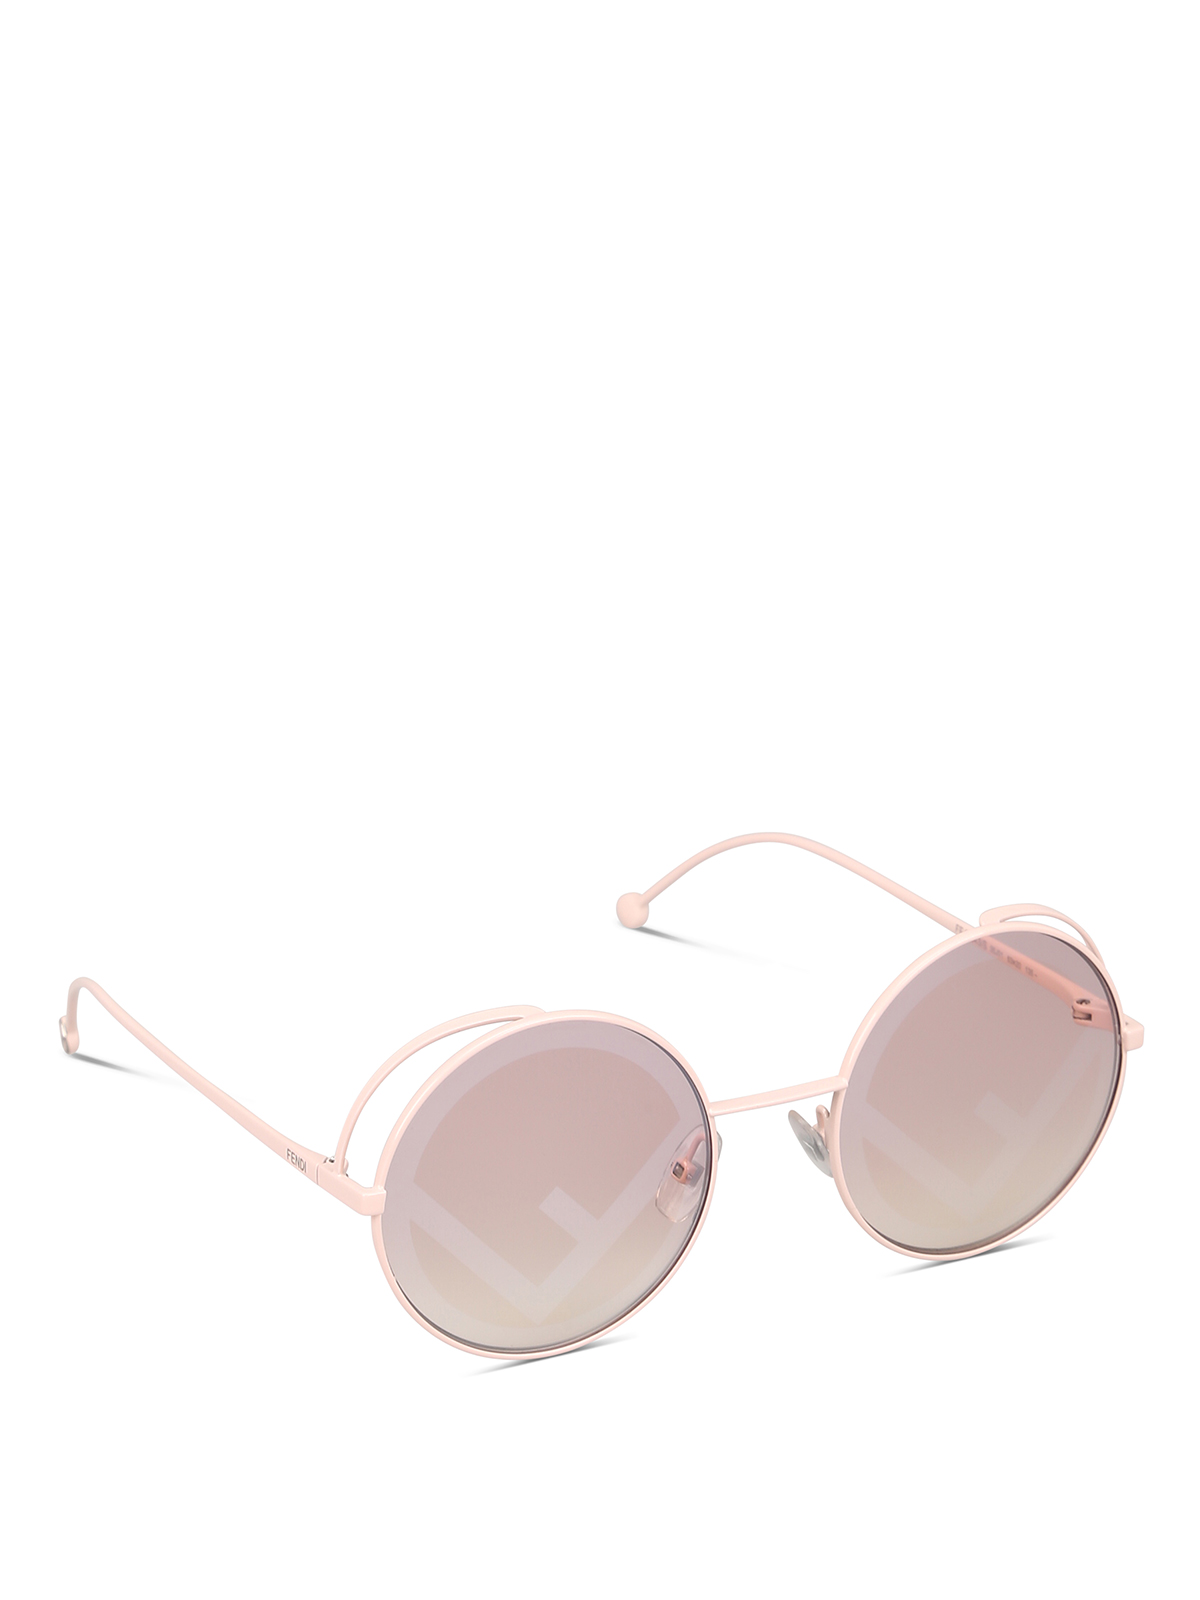 F patterned lens pink round sunglasses 